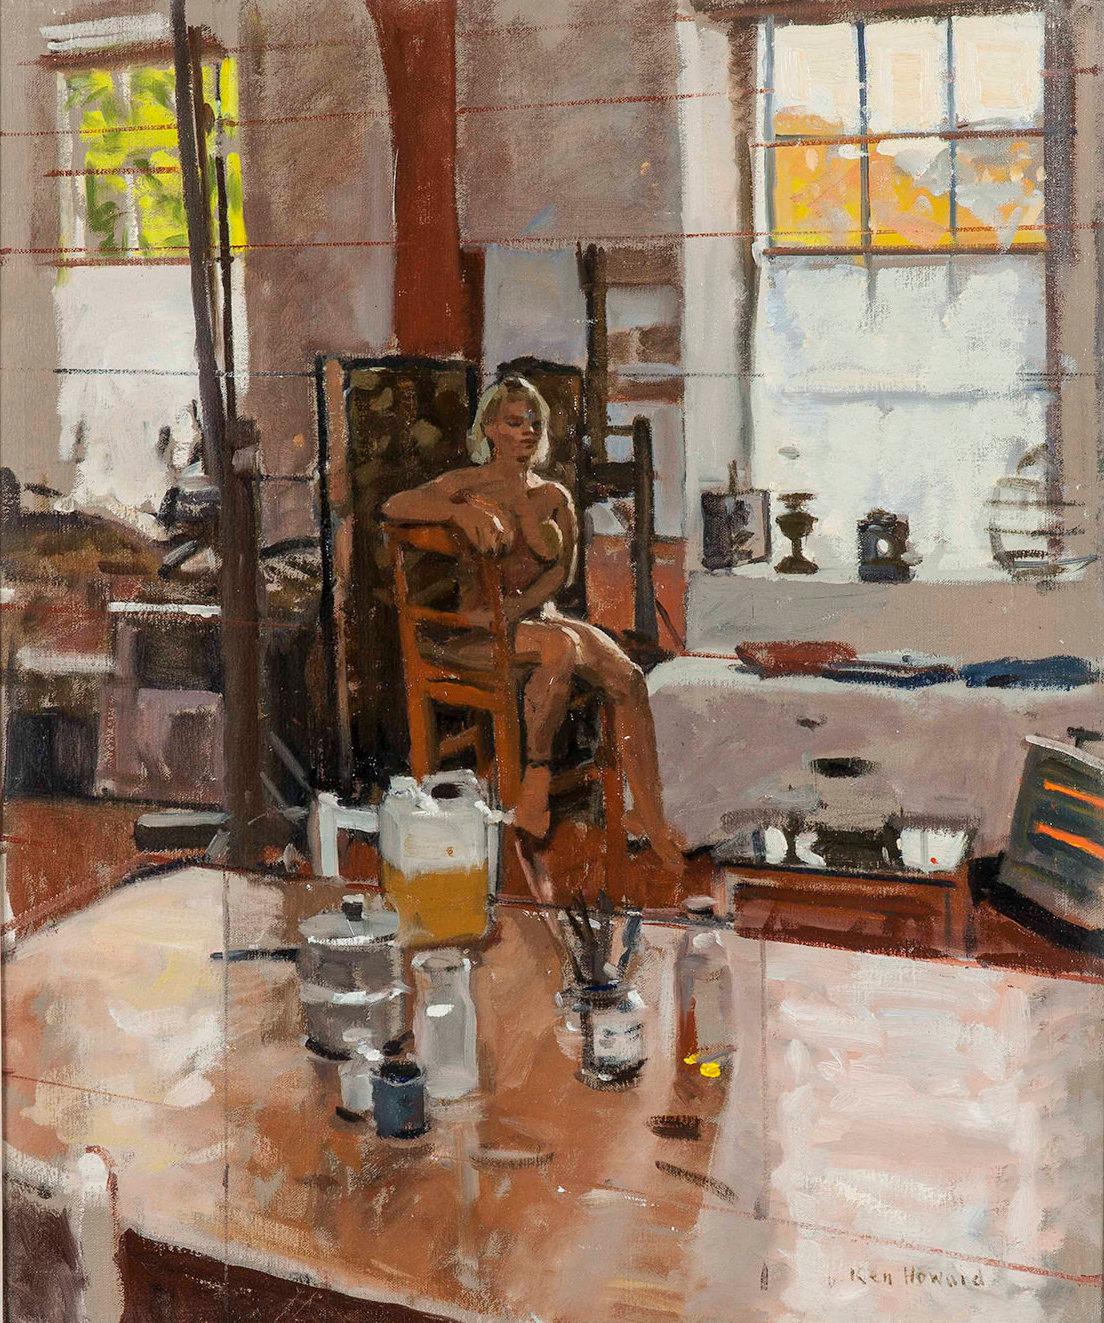 'Nude in My Studio' by Ken Howard 

Depicting a sunny interior scene of the artist's studio with a sitting female nude. Painted in the traditional contemporary style. Oil on canvas. Signed lower right.

Kenneth Howard OBE, RA, London born in